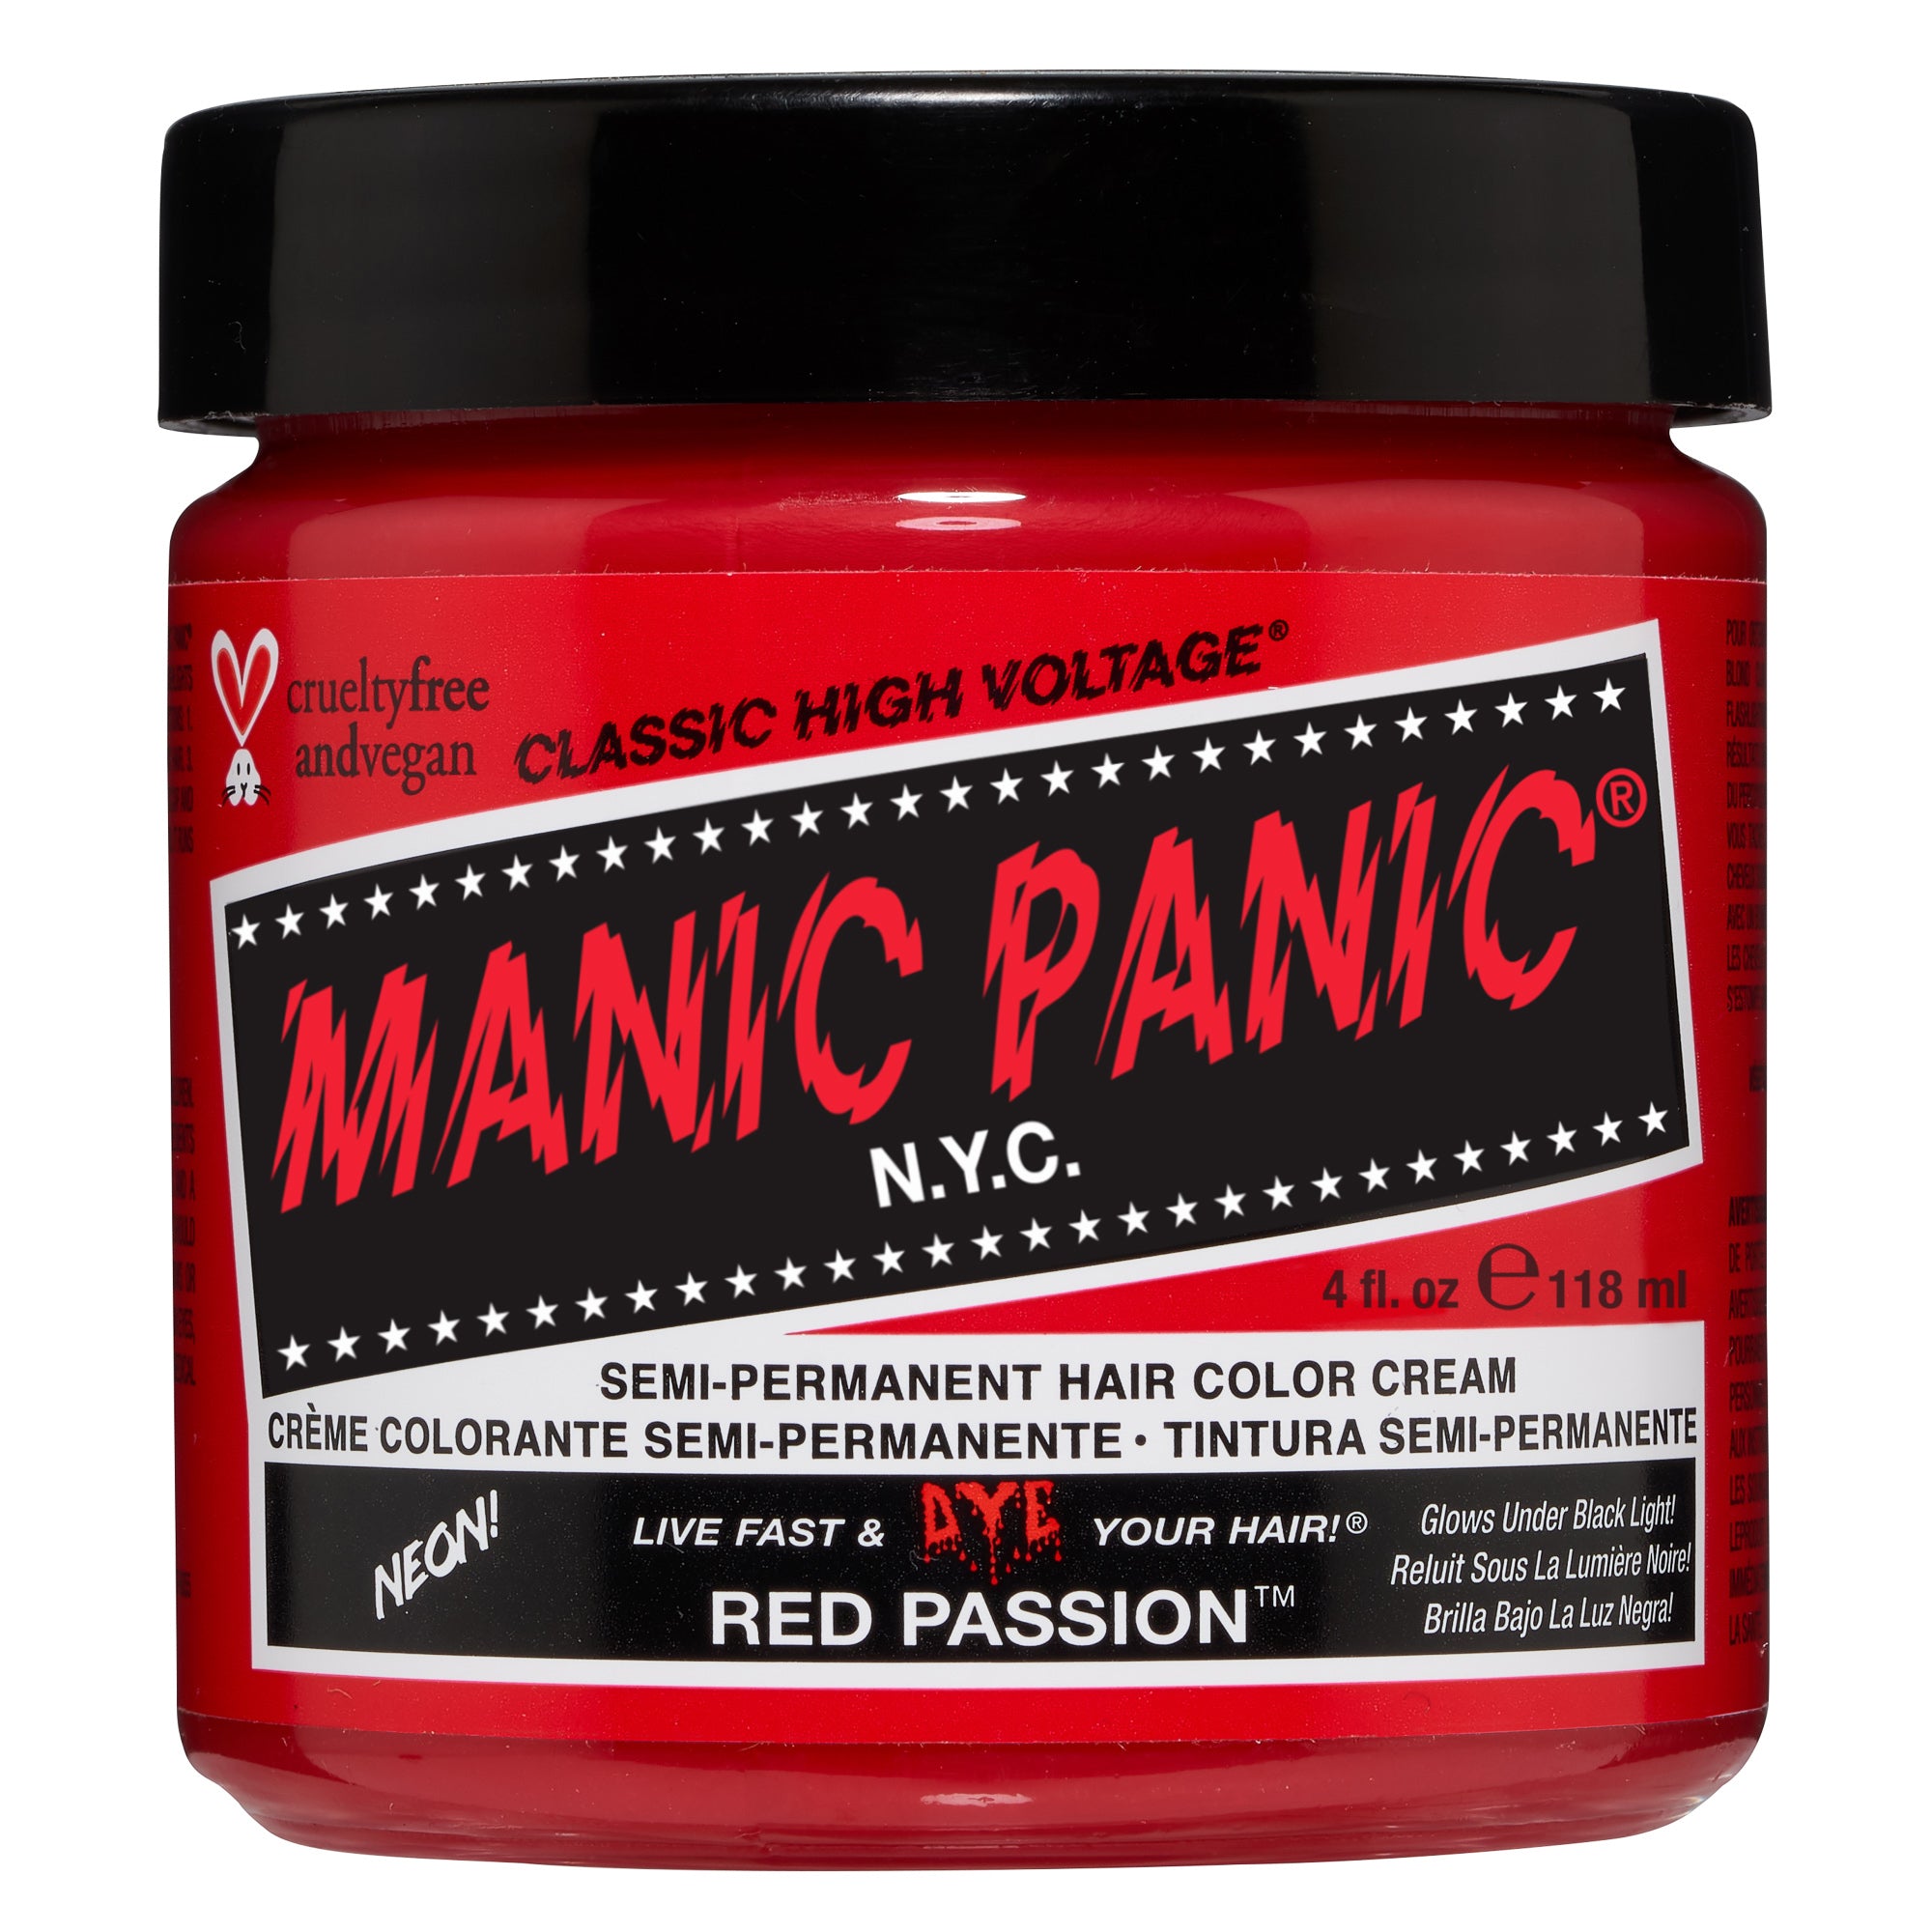 Red Passion™ - Classic High Voltage® - Tish & Snooky's Manic Panic, medium red, strawberry red, red pink, reddish pink, pinkish red, warm red, pink toned red, semi permanent hair color, hair dye